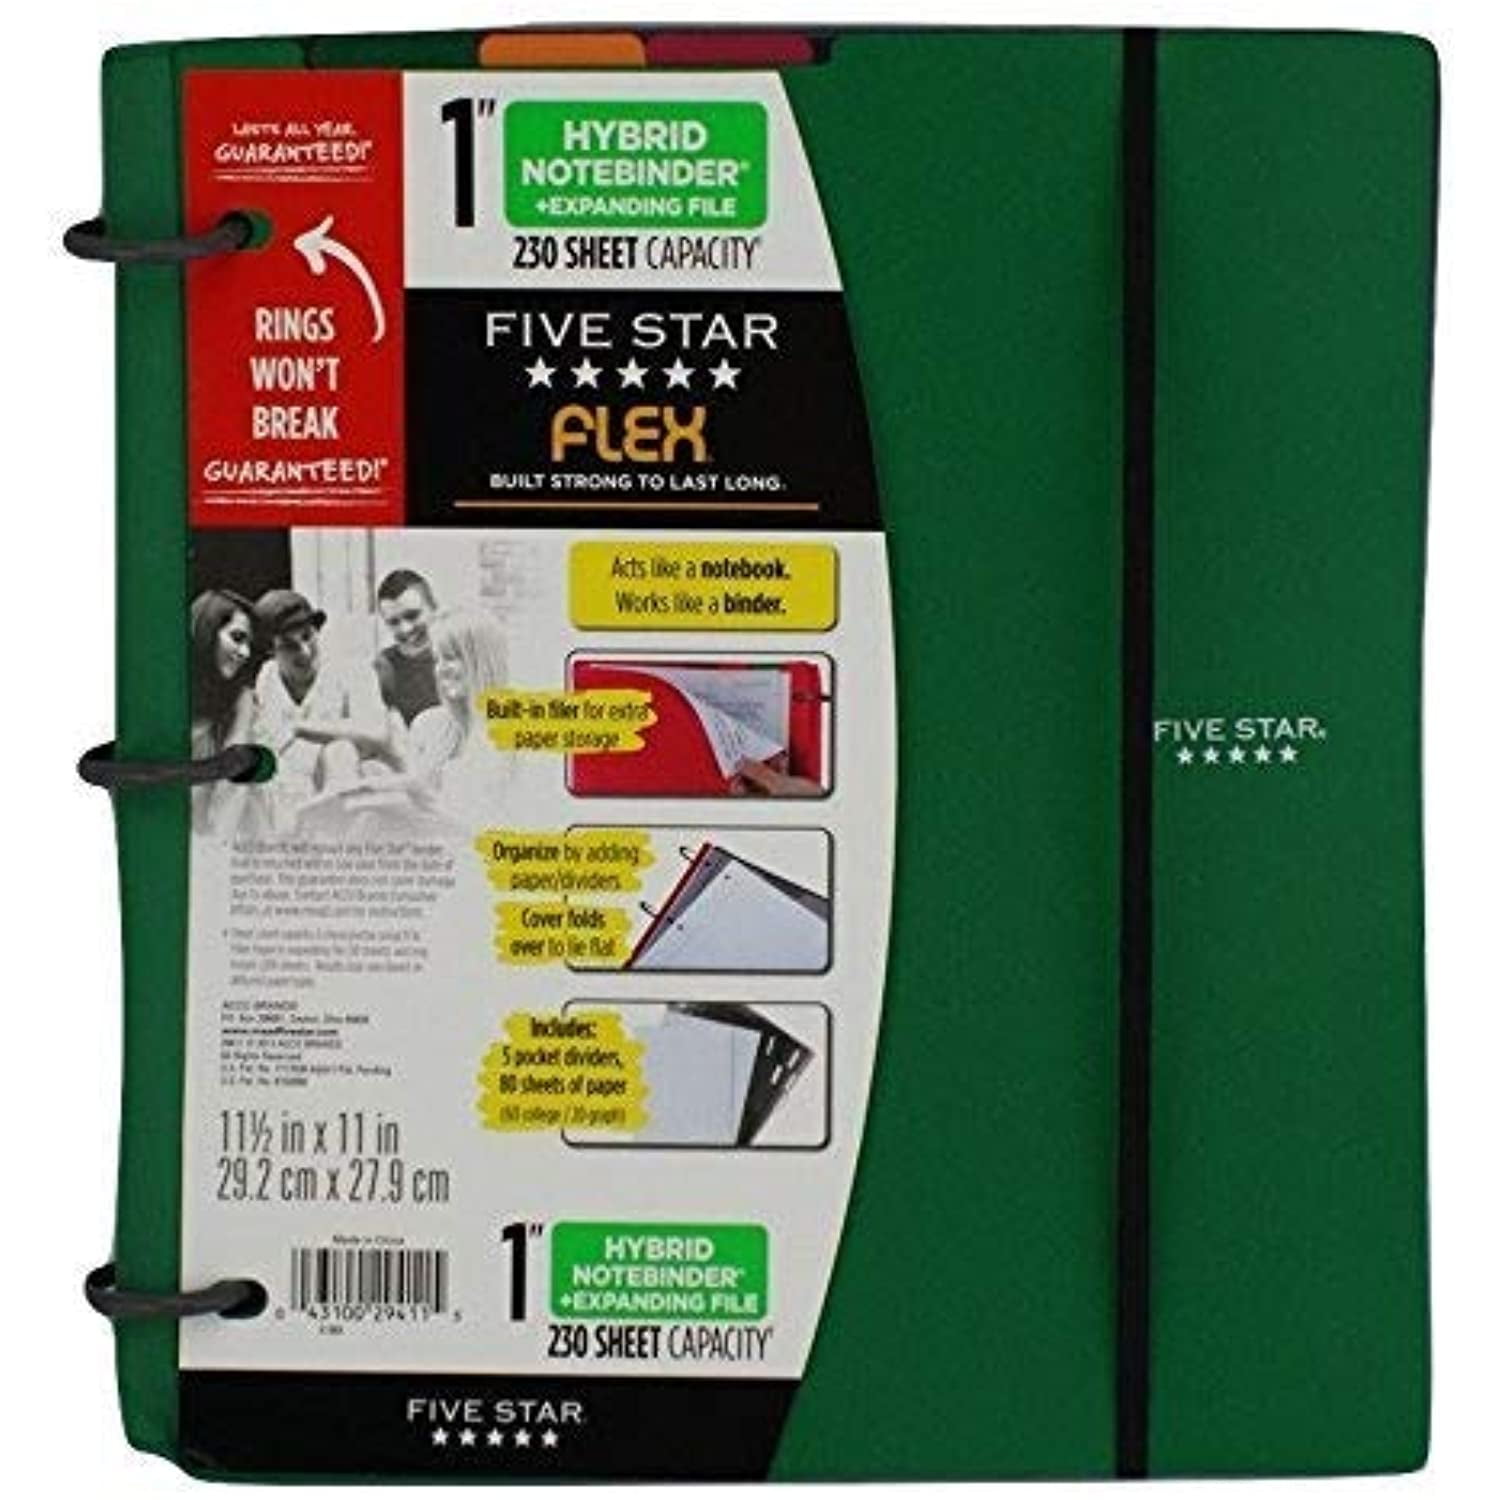 Five Star Flex Hybrid Notebinder +Expanding File 1-inch 230 sheet capacity,  11.5 x 11 inches, Notebook and Binder All-in-One, (X-563) (Black)